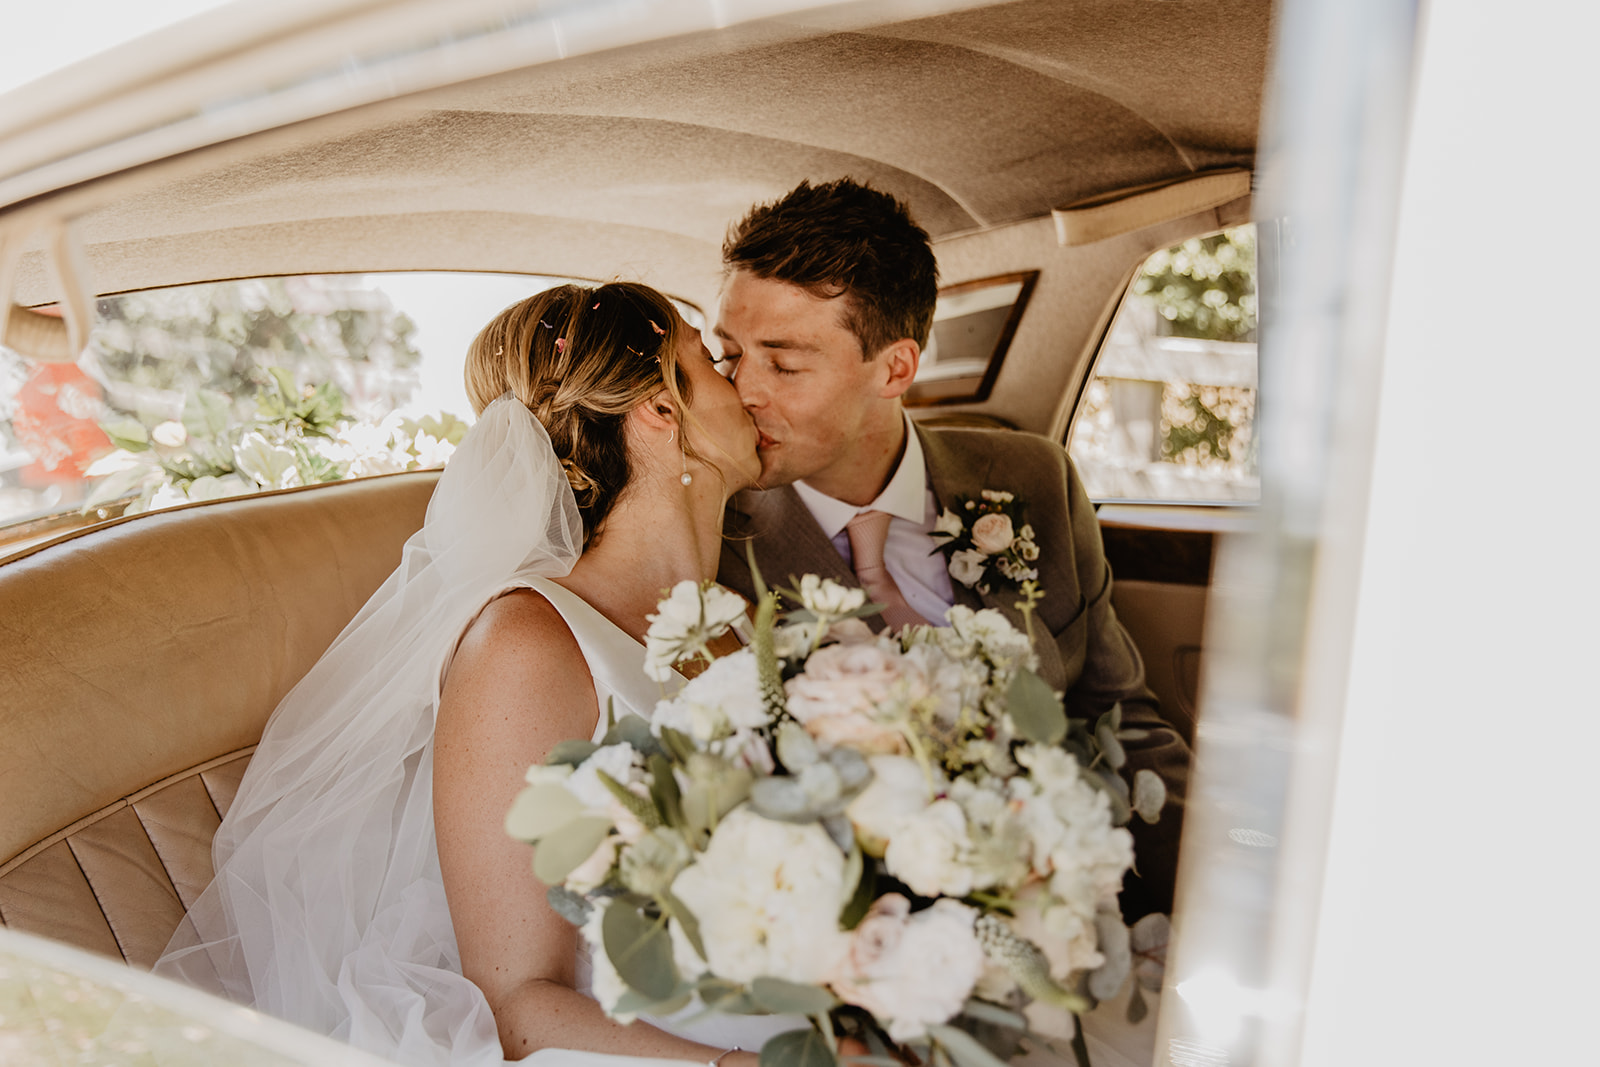 Bride and groom kissing in their wedding car at an RHS Gardens Wisley Wedding. By Olive Joy Photography